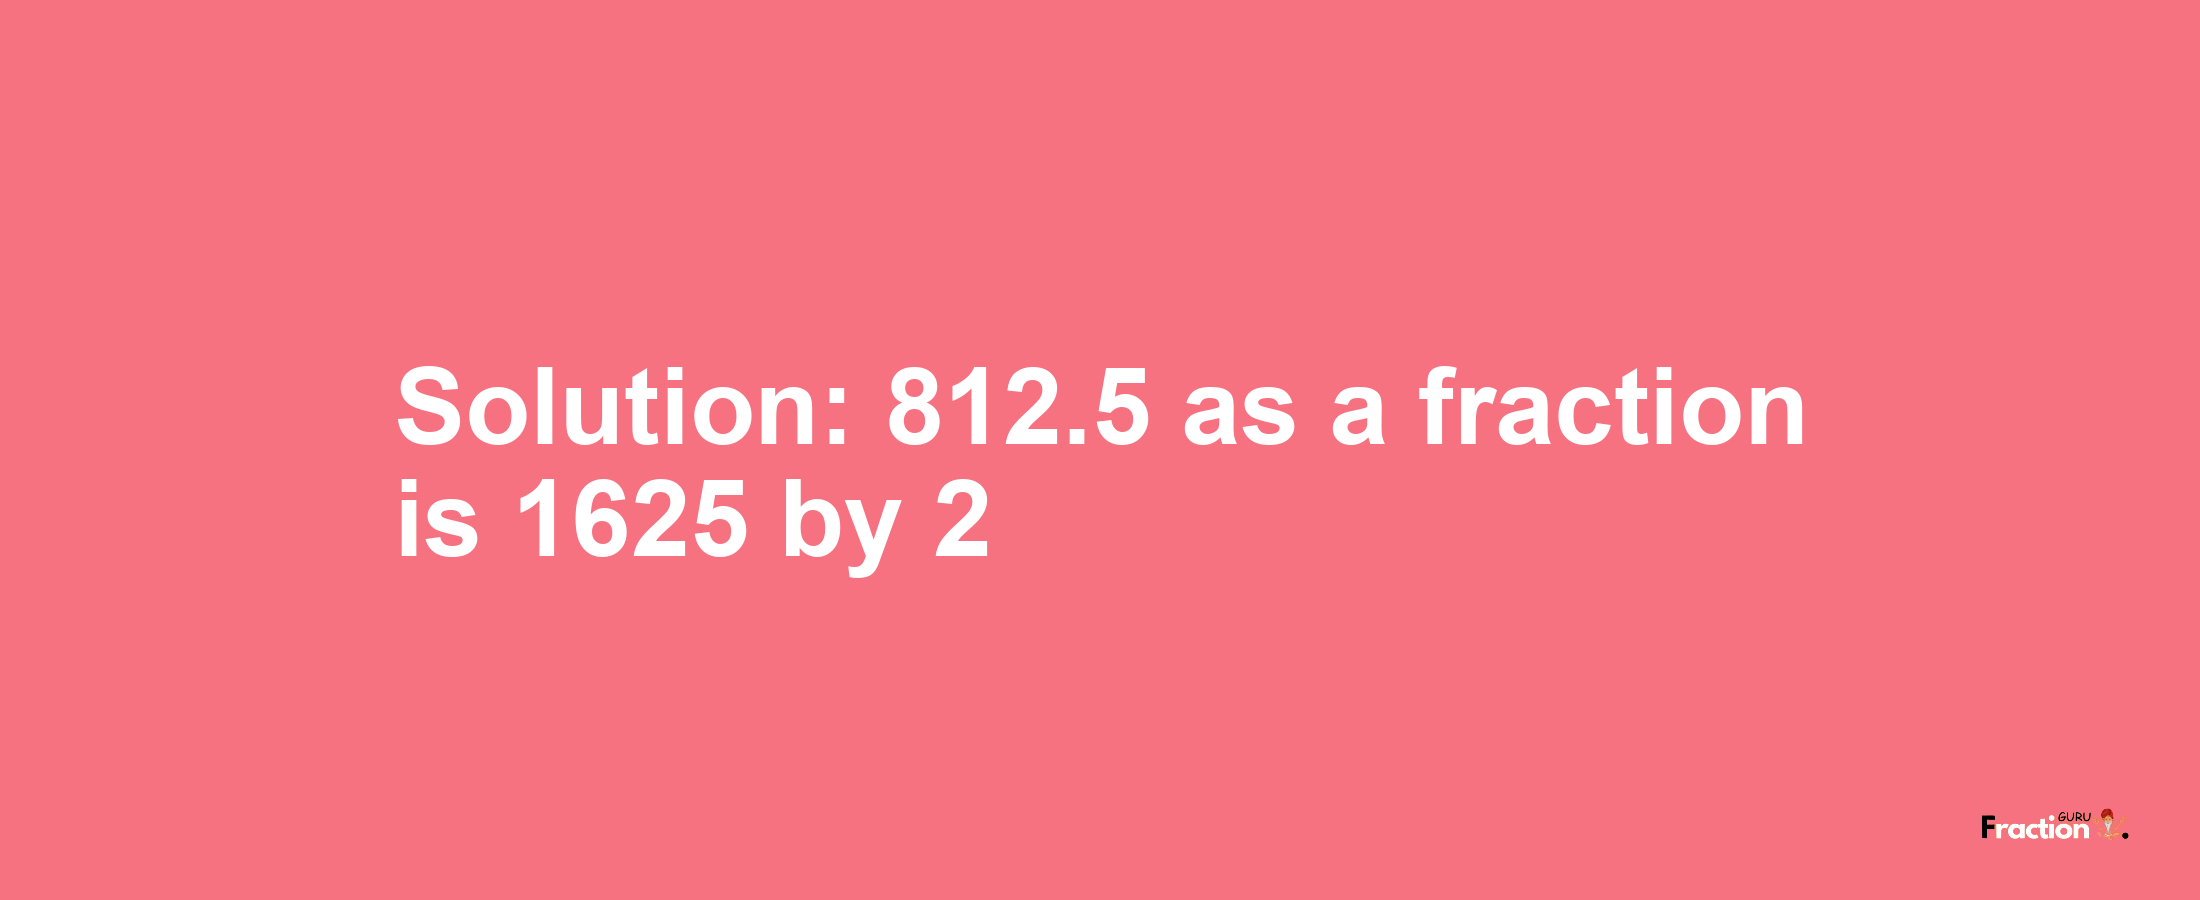 Solution:812.5 as a fraction is 1625/2